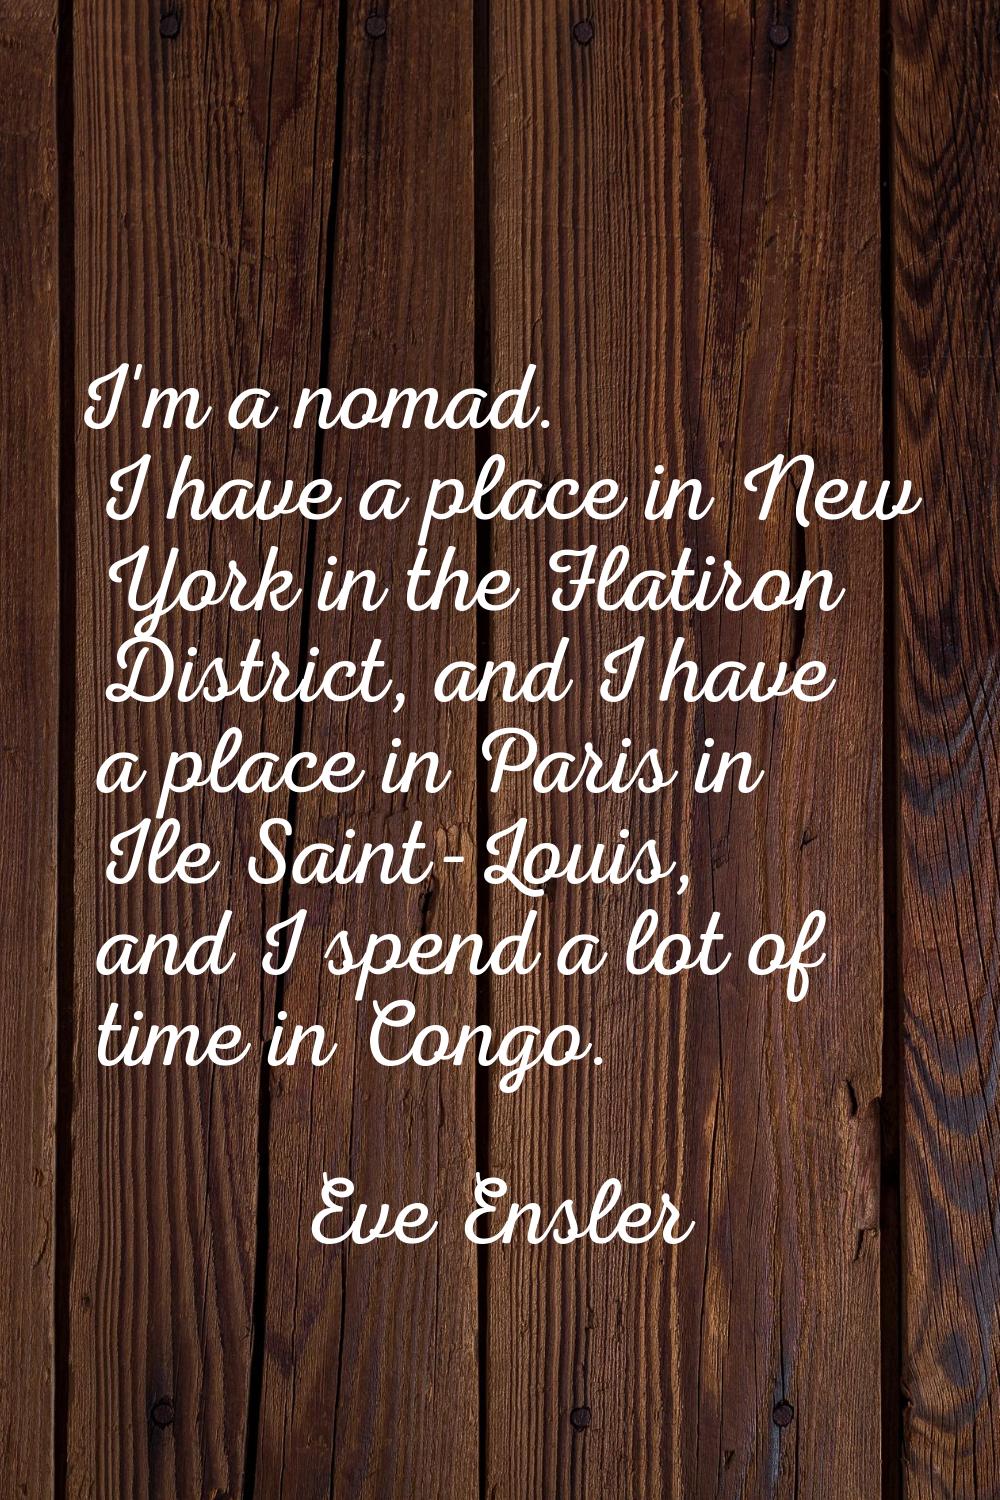 I'm a nomad. I have a place in New York in the Flatiron District, and I have a place in Paris in Il